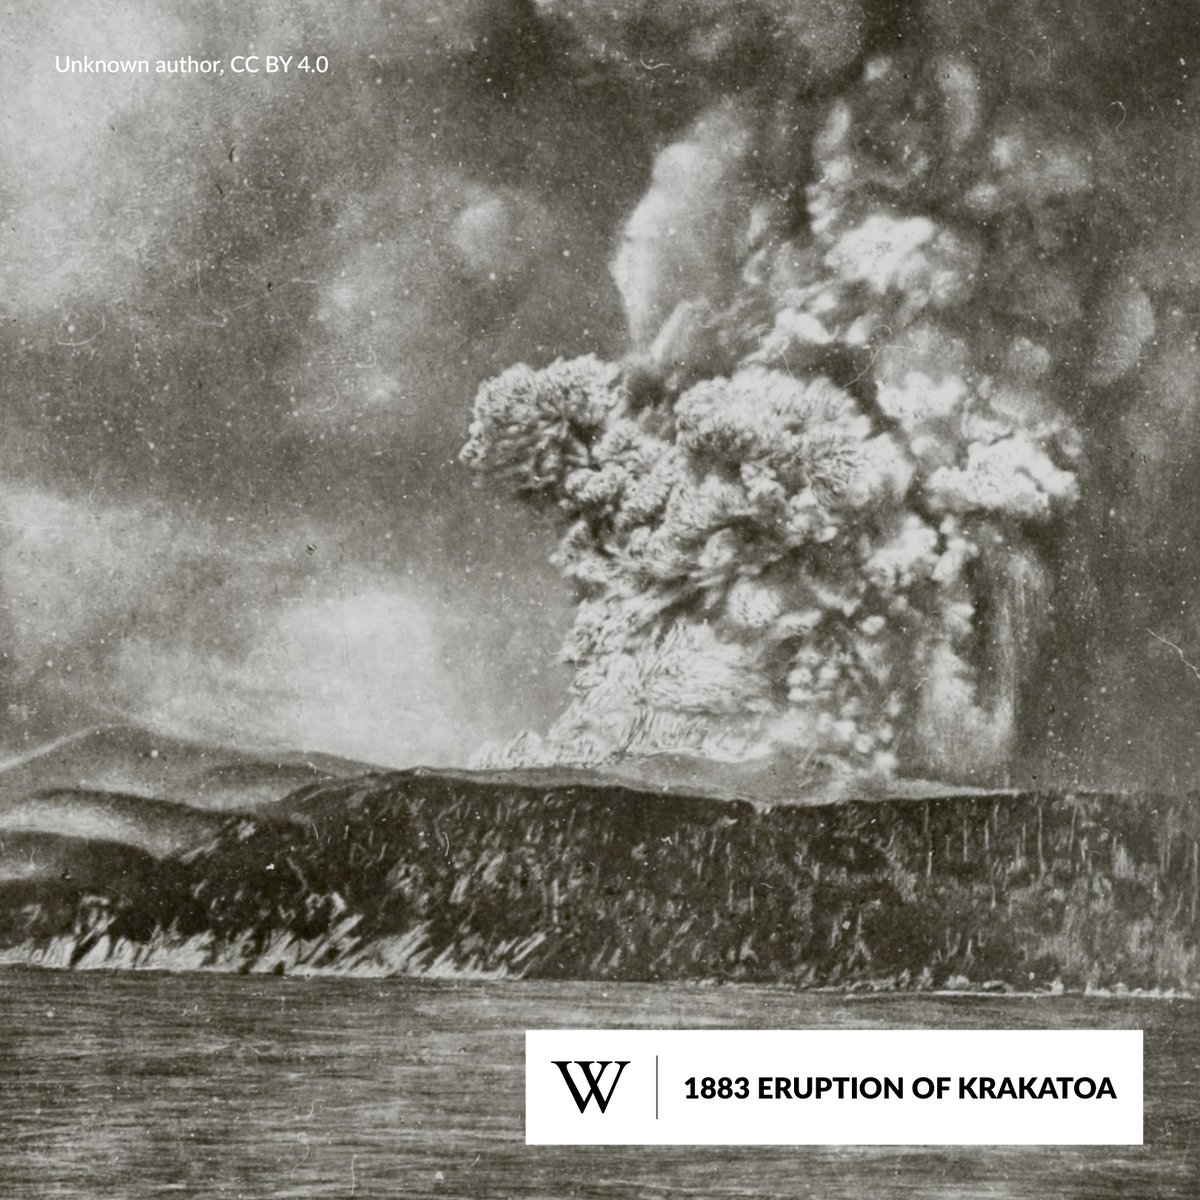 On this day in 1883, the Krakatoa volcano began its catastrophic eruption, ultimately destroying more than 70% of the Indonesian caldera and its surrounding archipelago. The eruption of Krakatoa was one of the deadliest and most destructive volcanic events in recorded history.